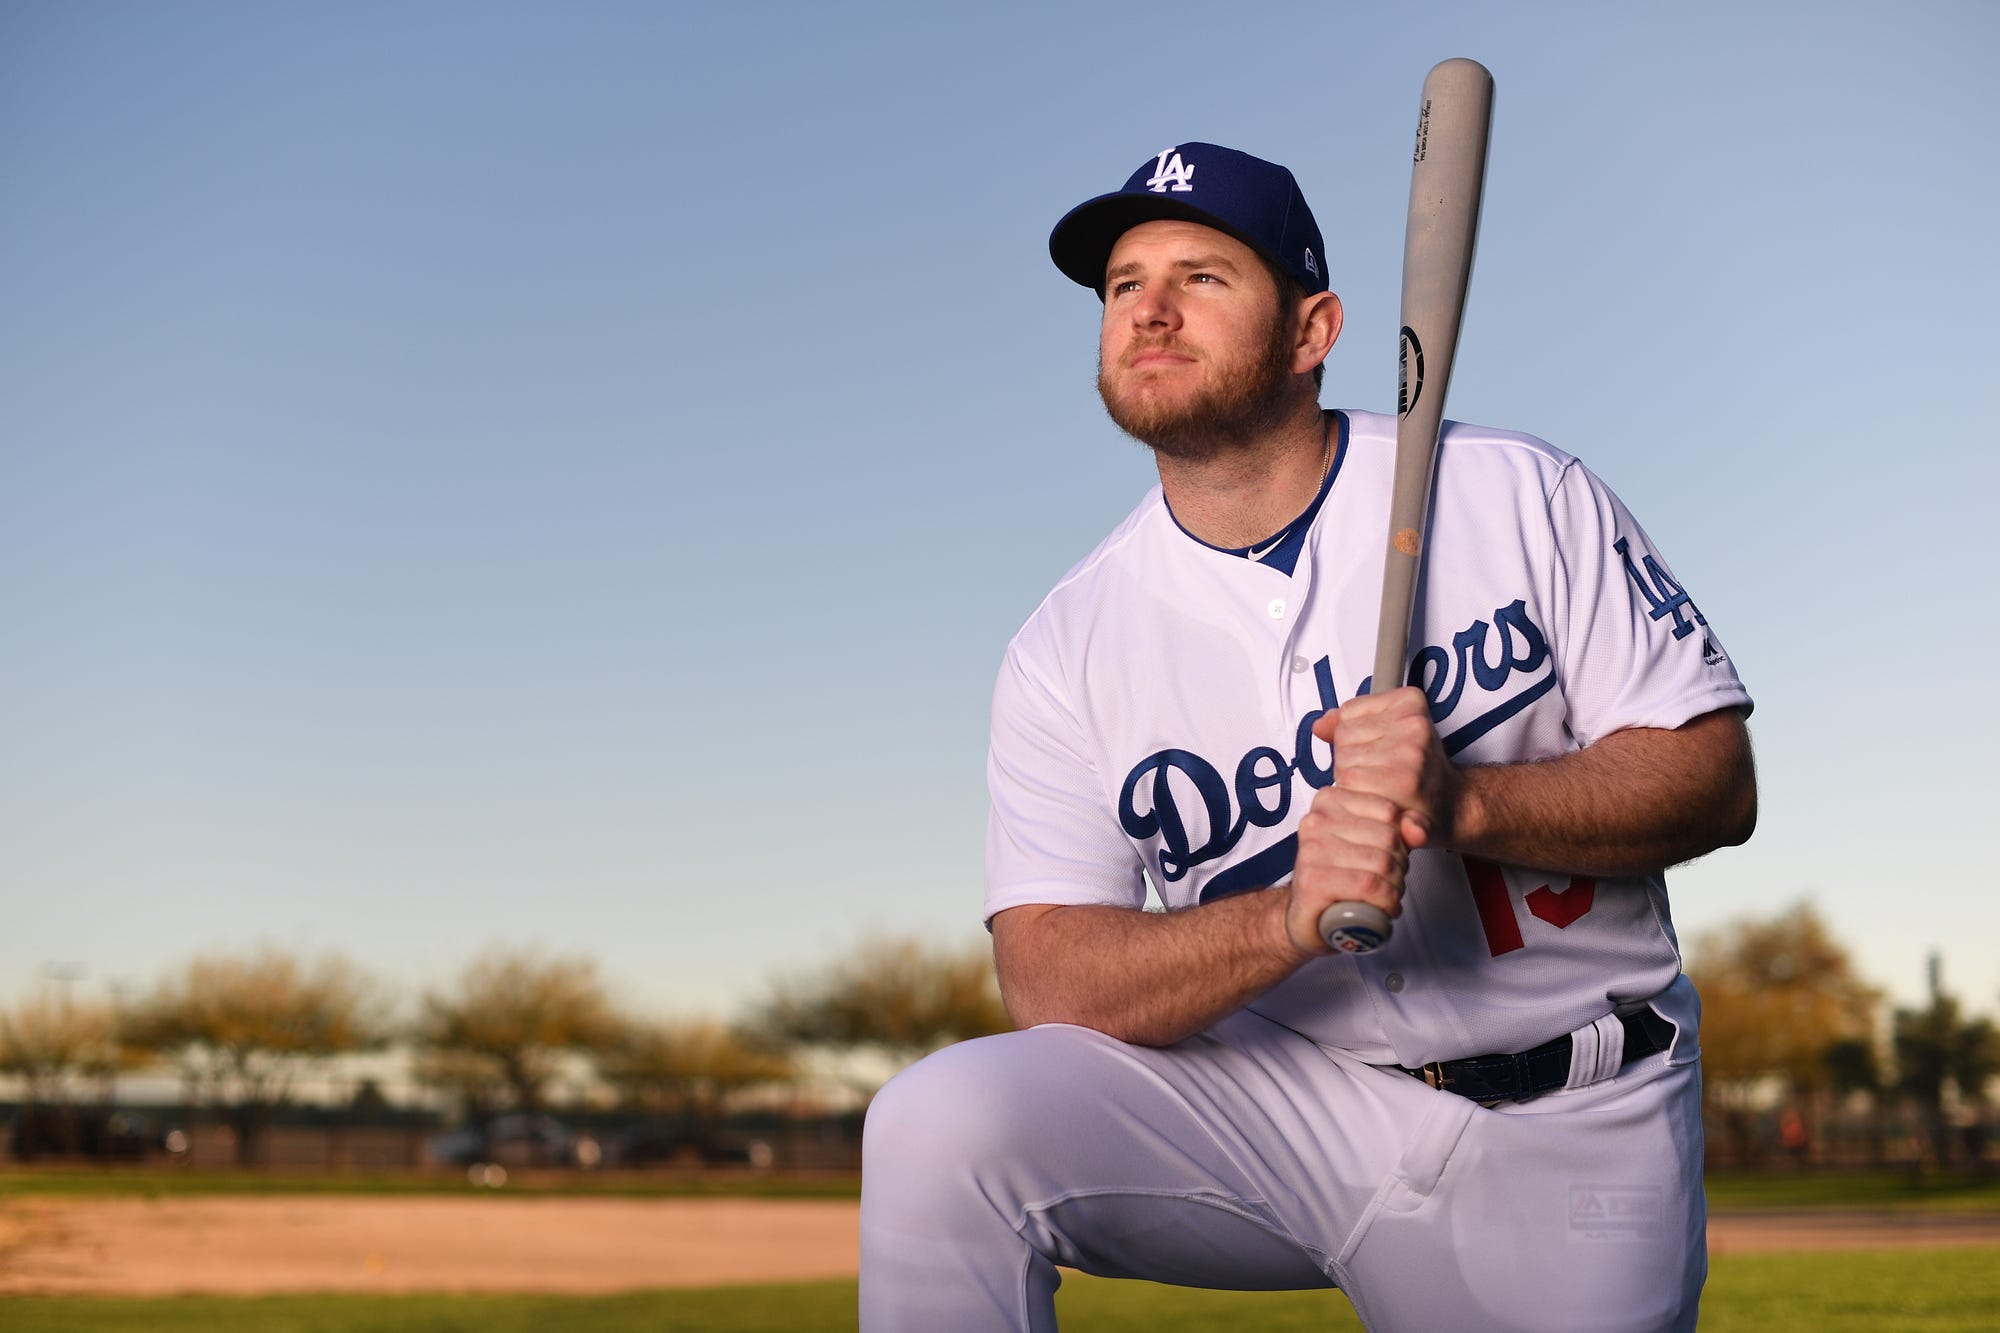 From the Mag: Won't Back Down. Max Muncy was motivated to show